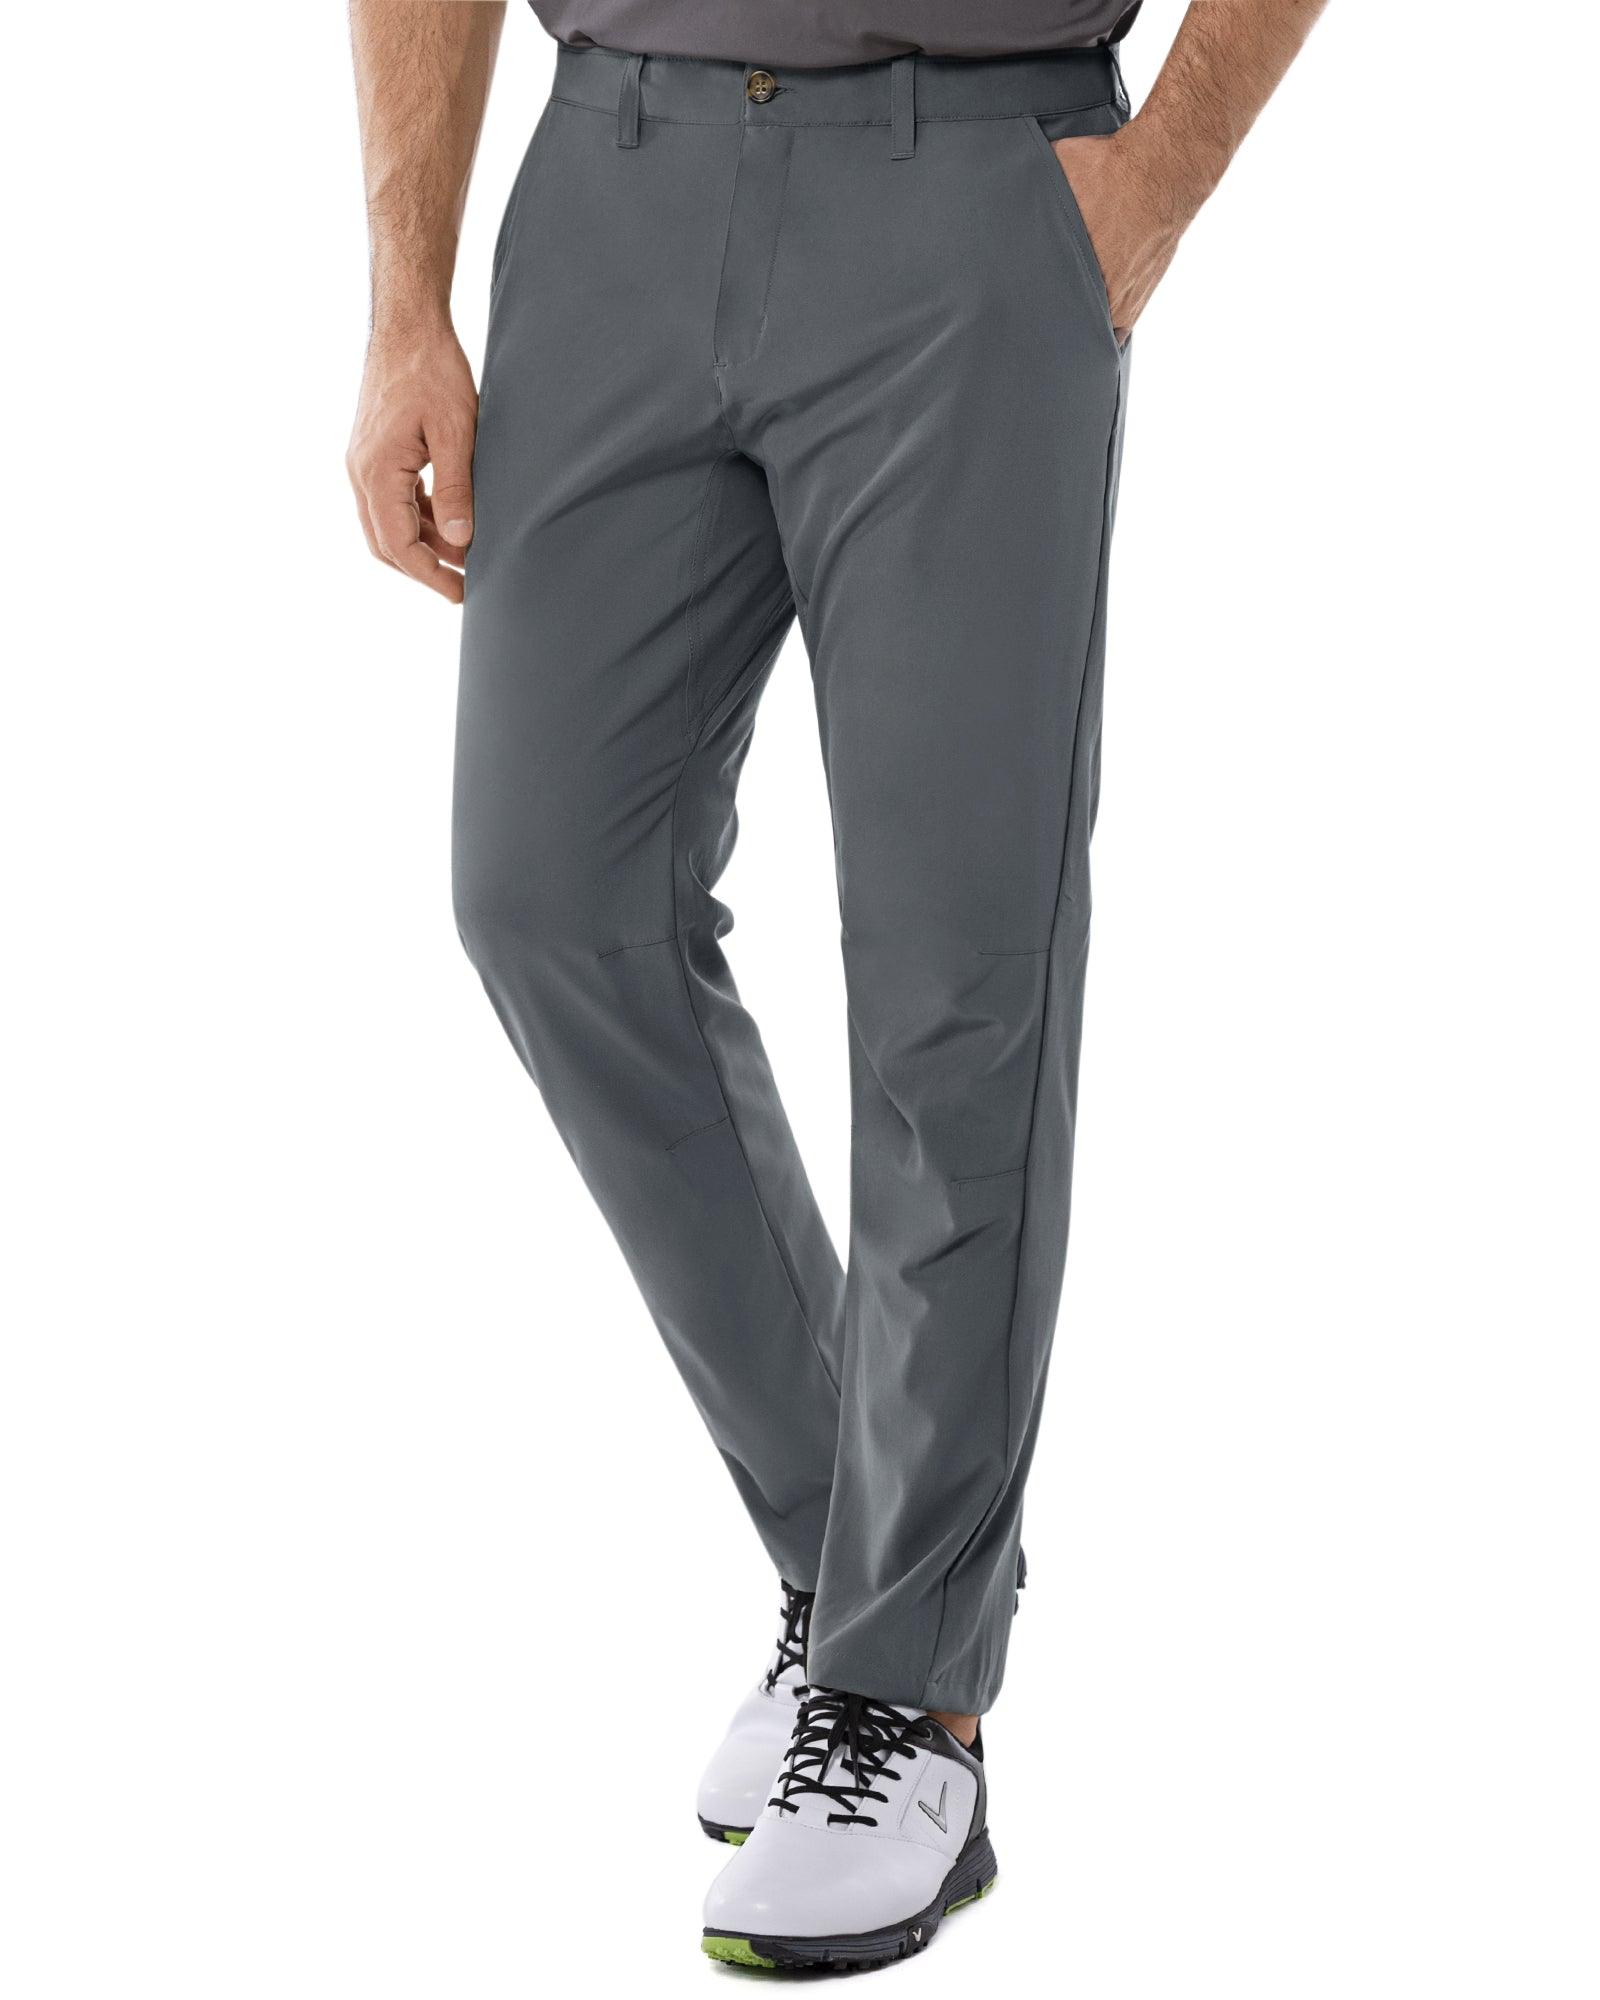 Men's UPF 50+ Quick Dry Golf Pants with 5 Pockets – 33,000ft